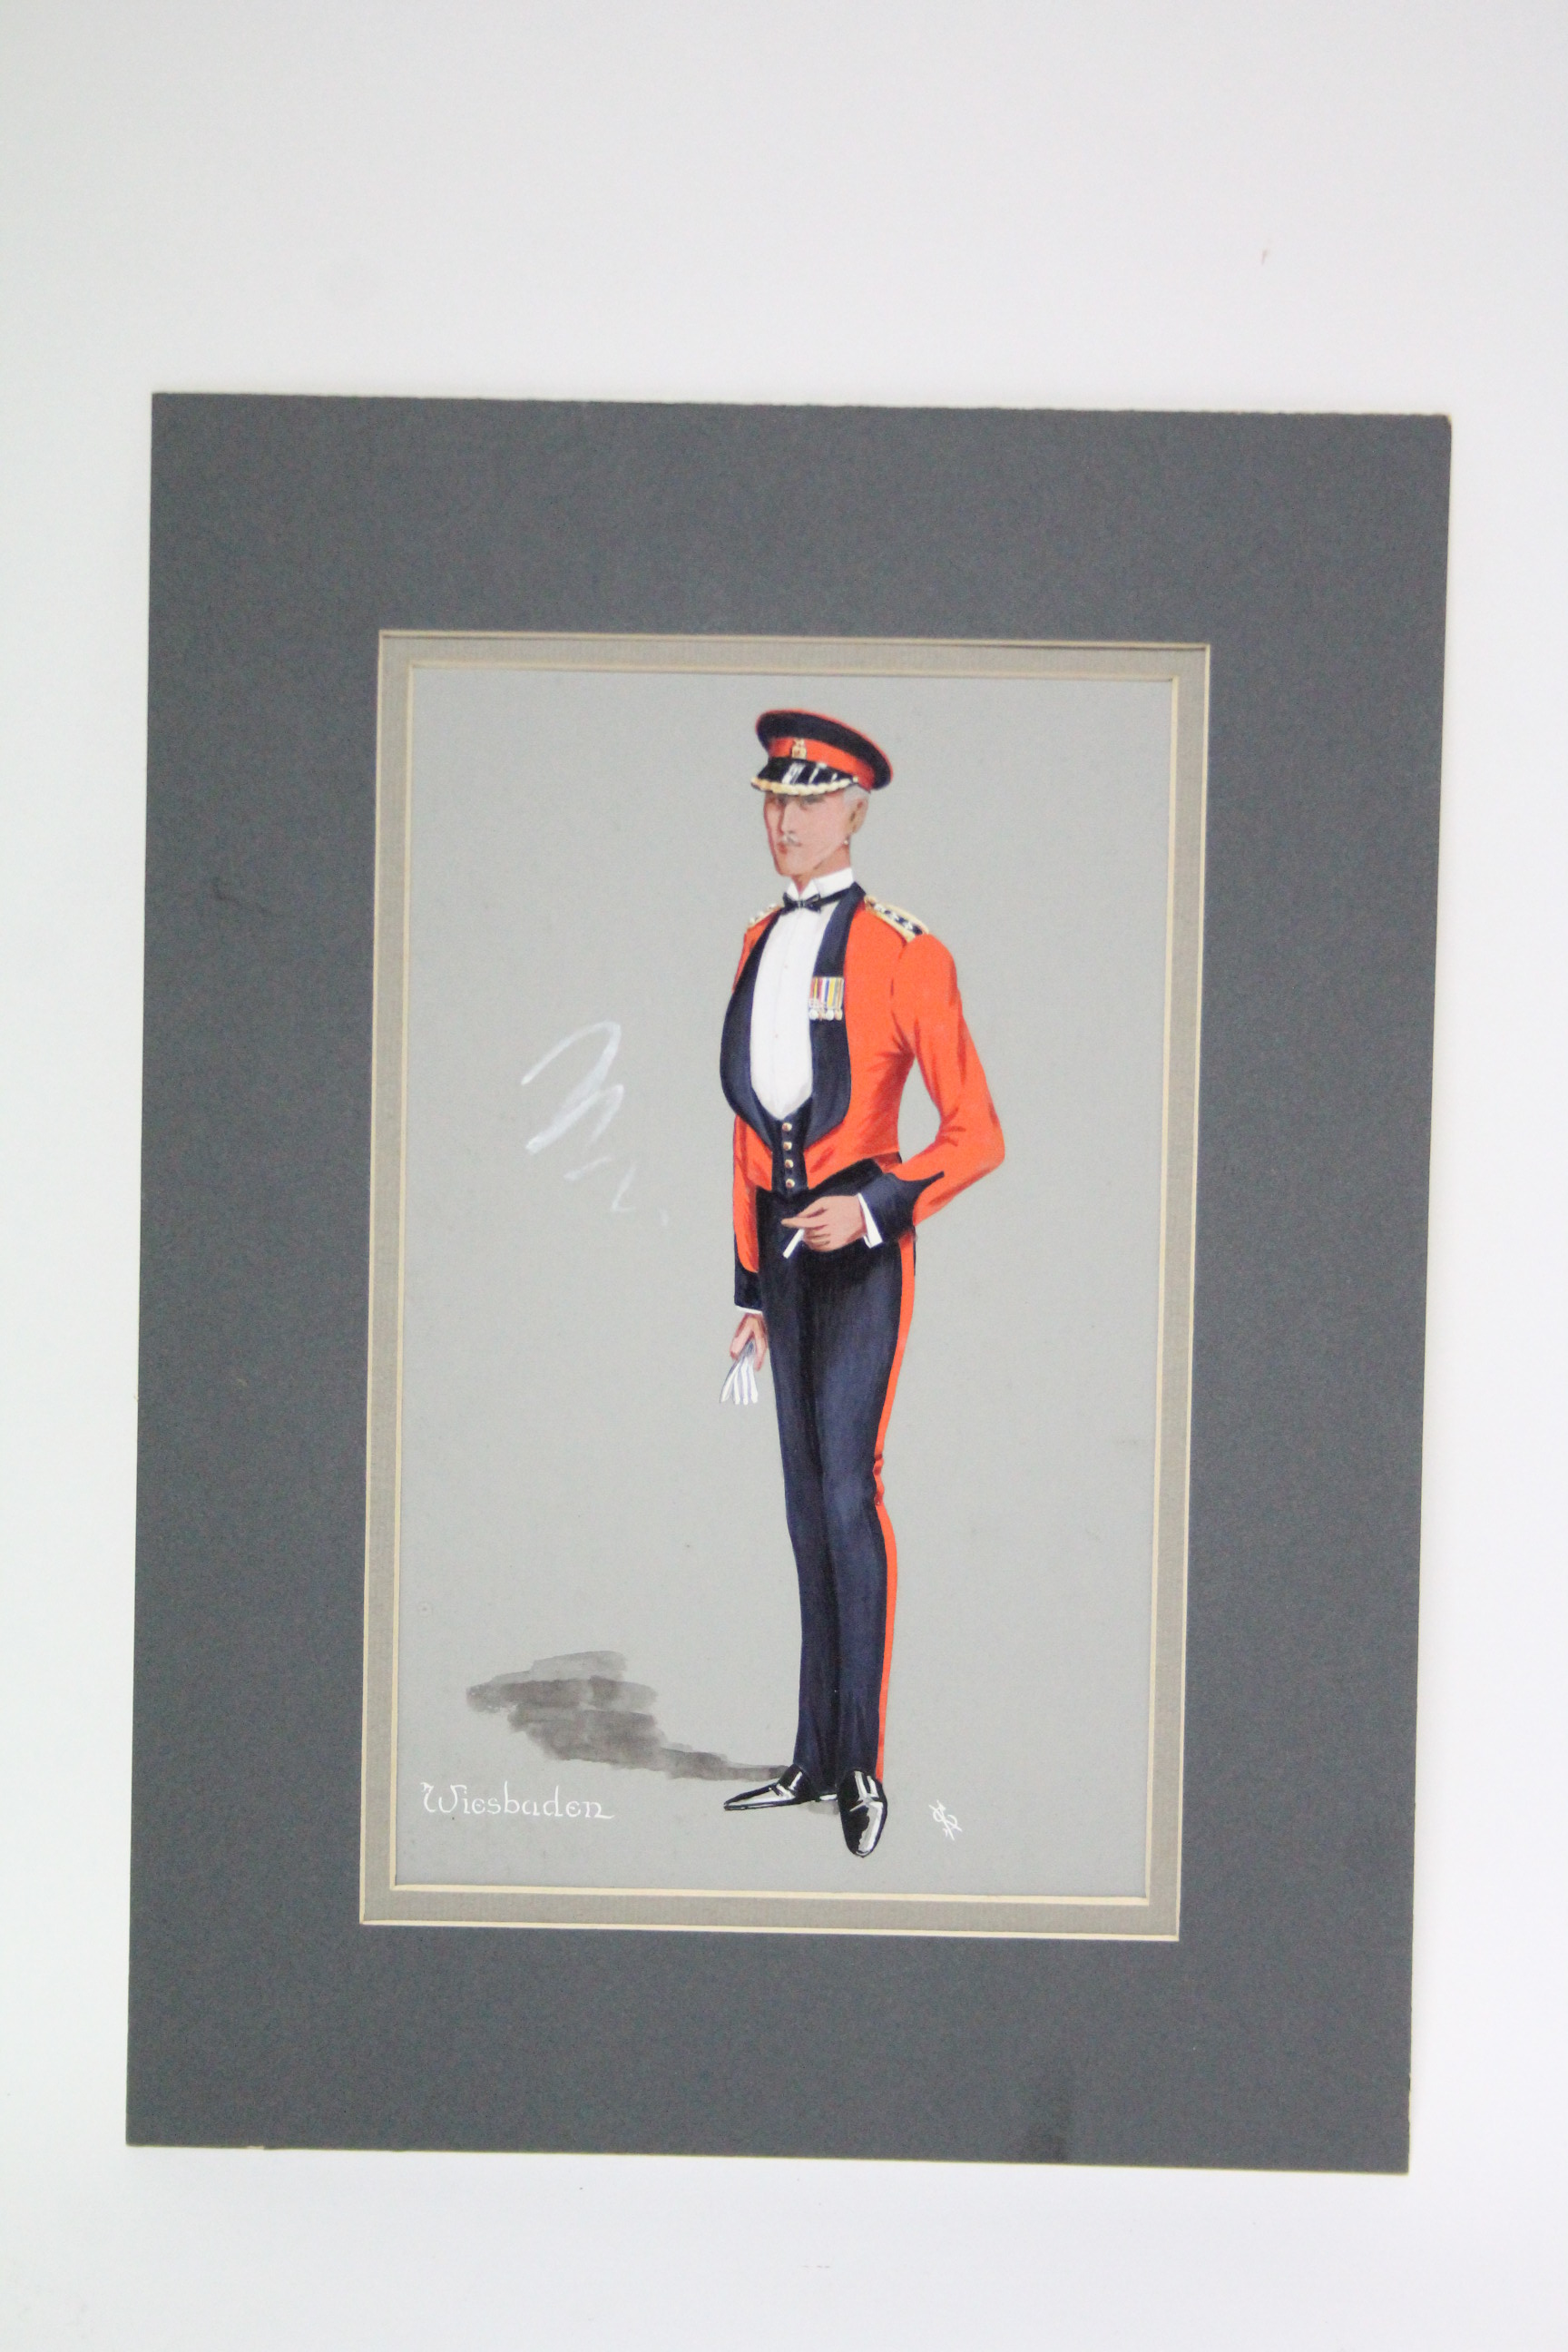 A standing portrait of a military officer in dress uniform, inscribed: “Wiesbaden”, & signed with